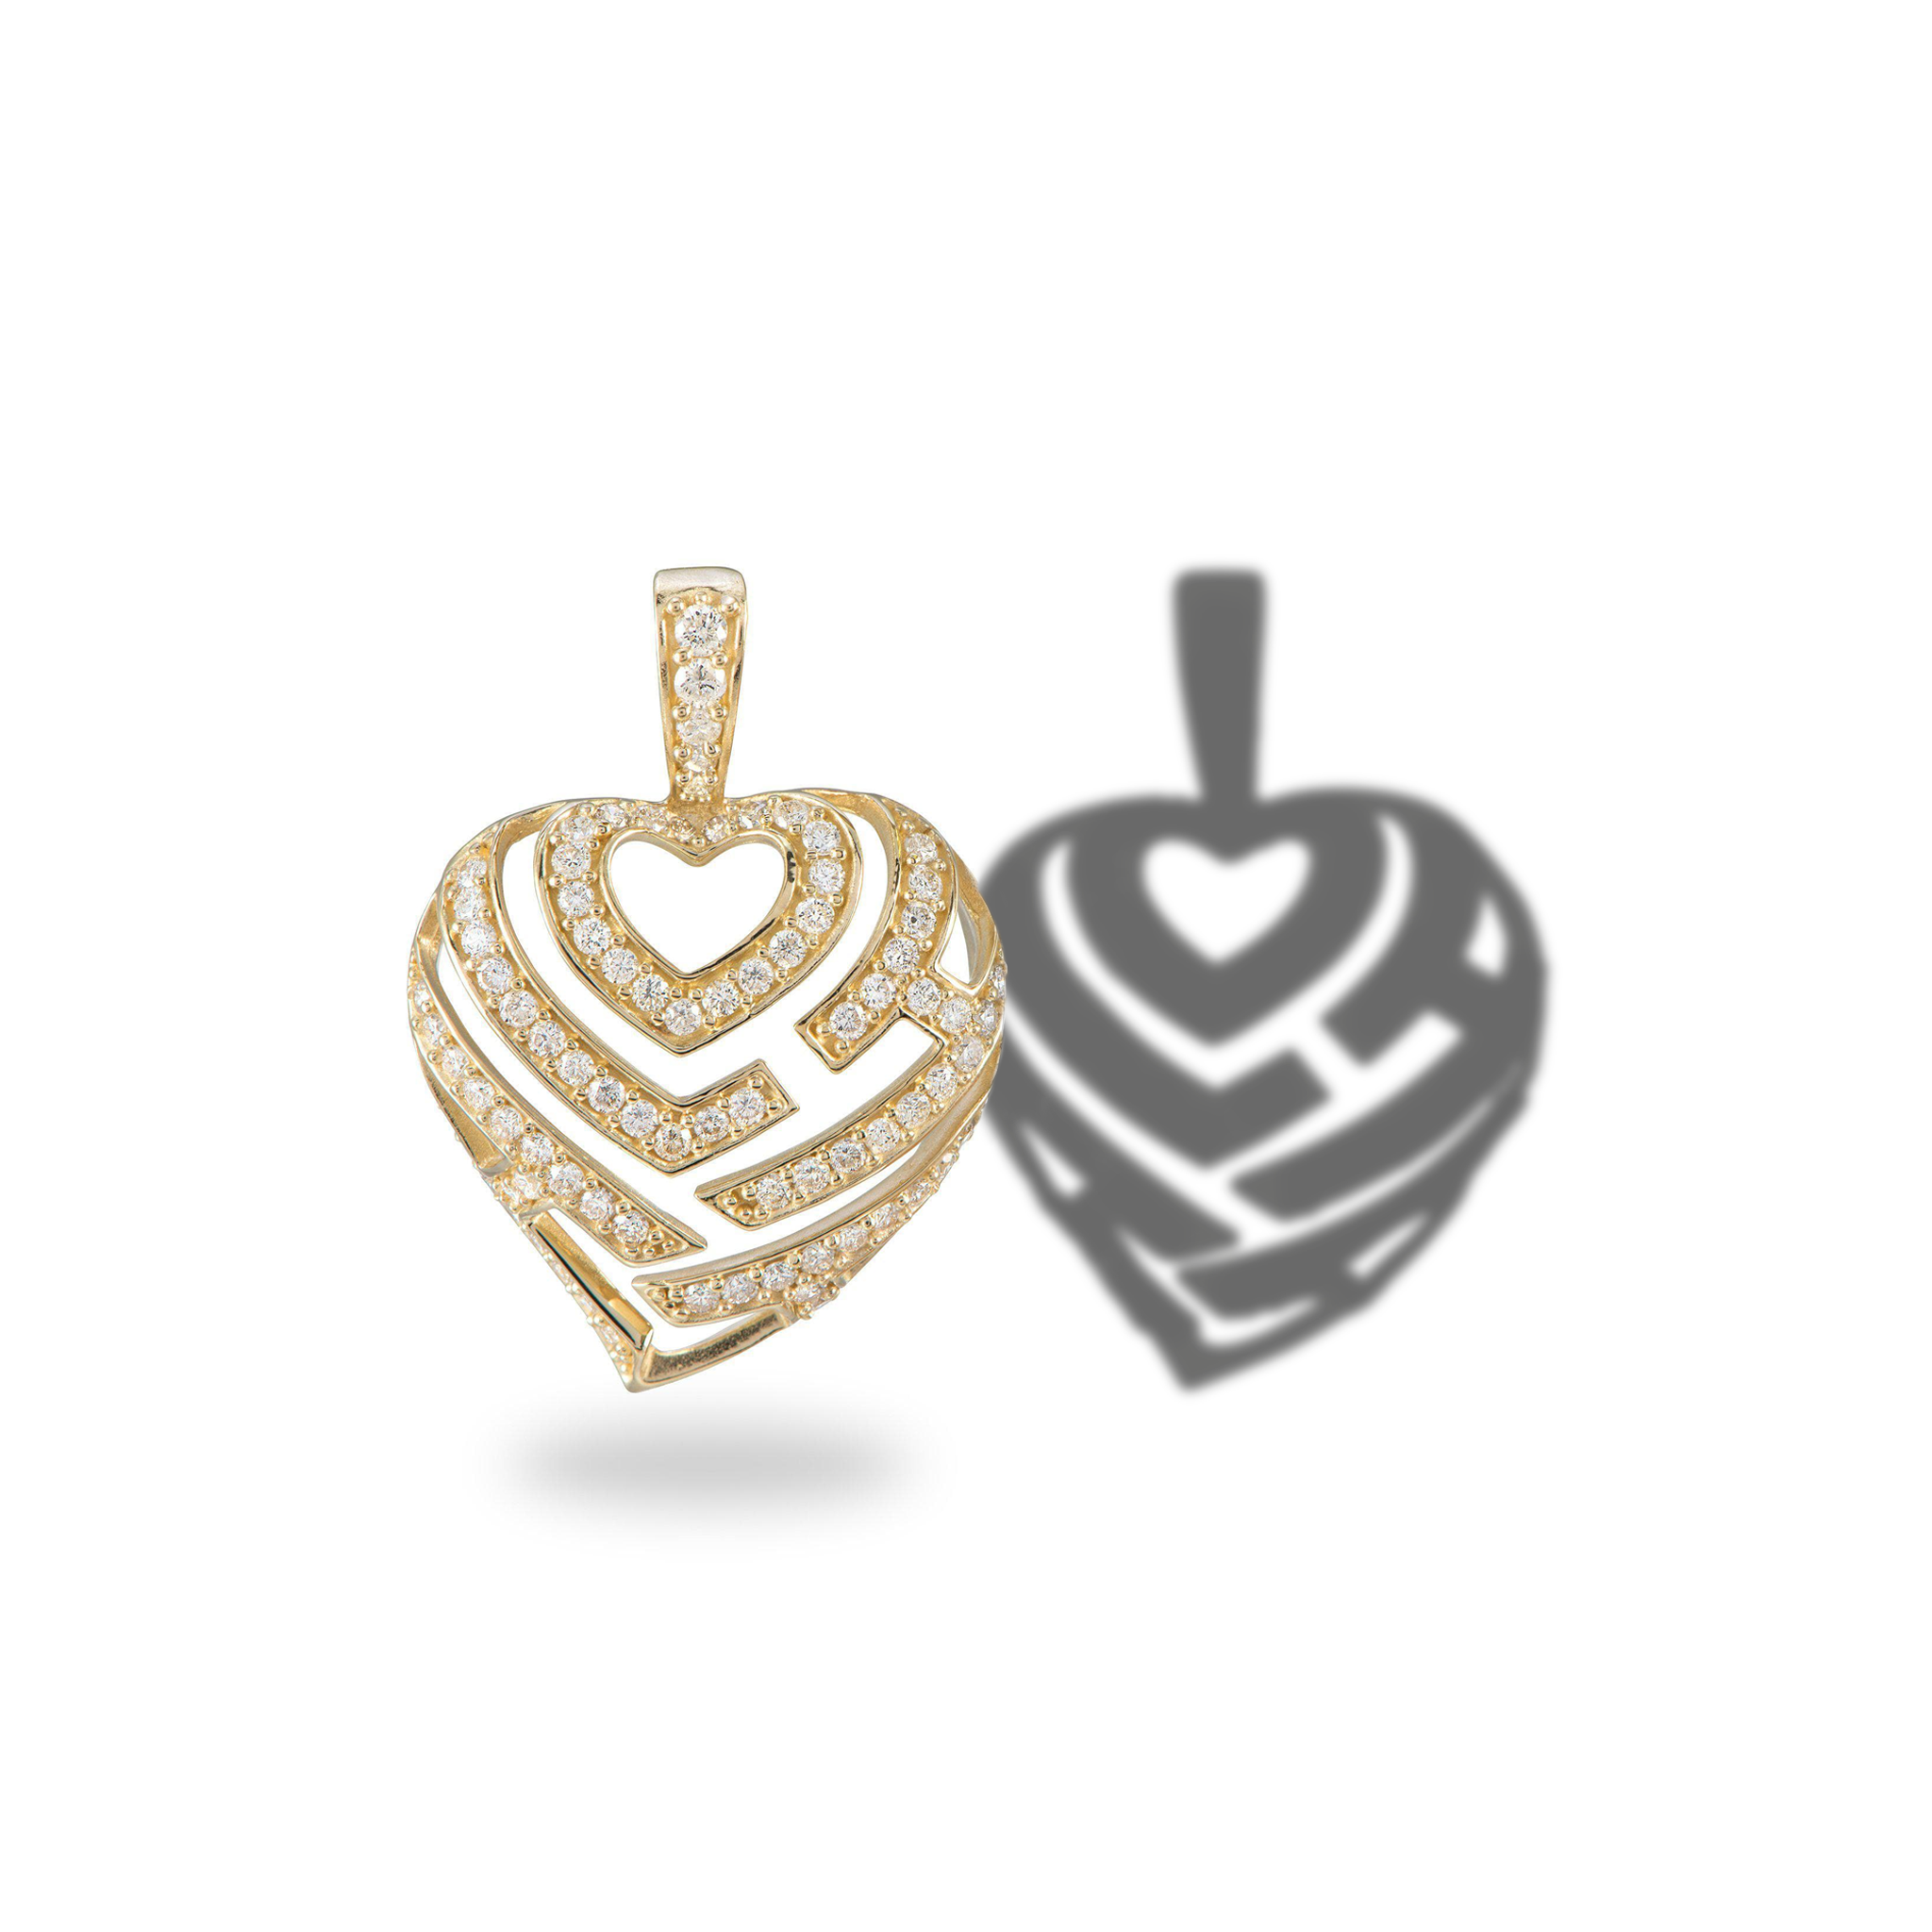 Aloha Heart Pendant in Gold with Diamonds - 18mm